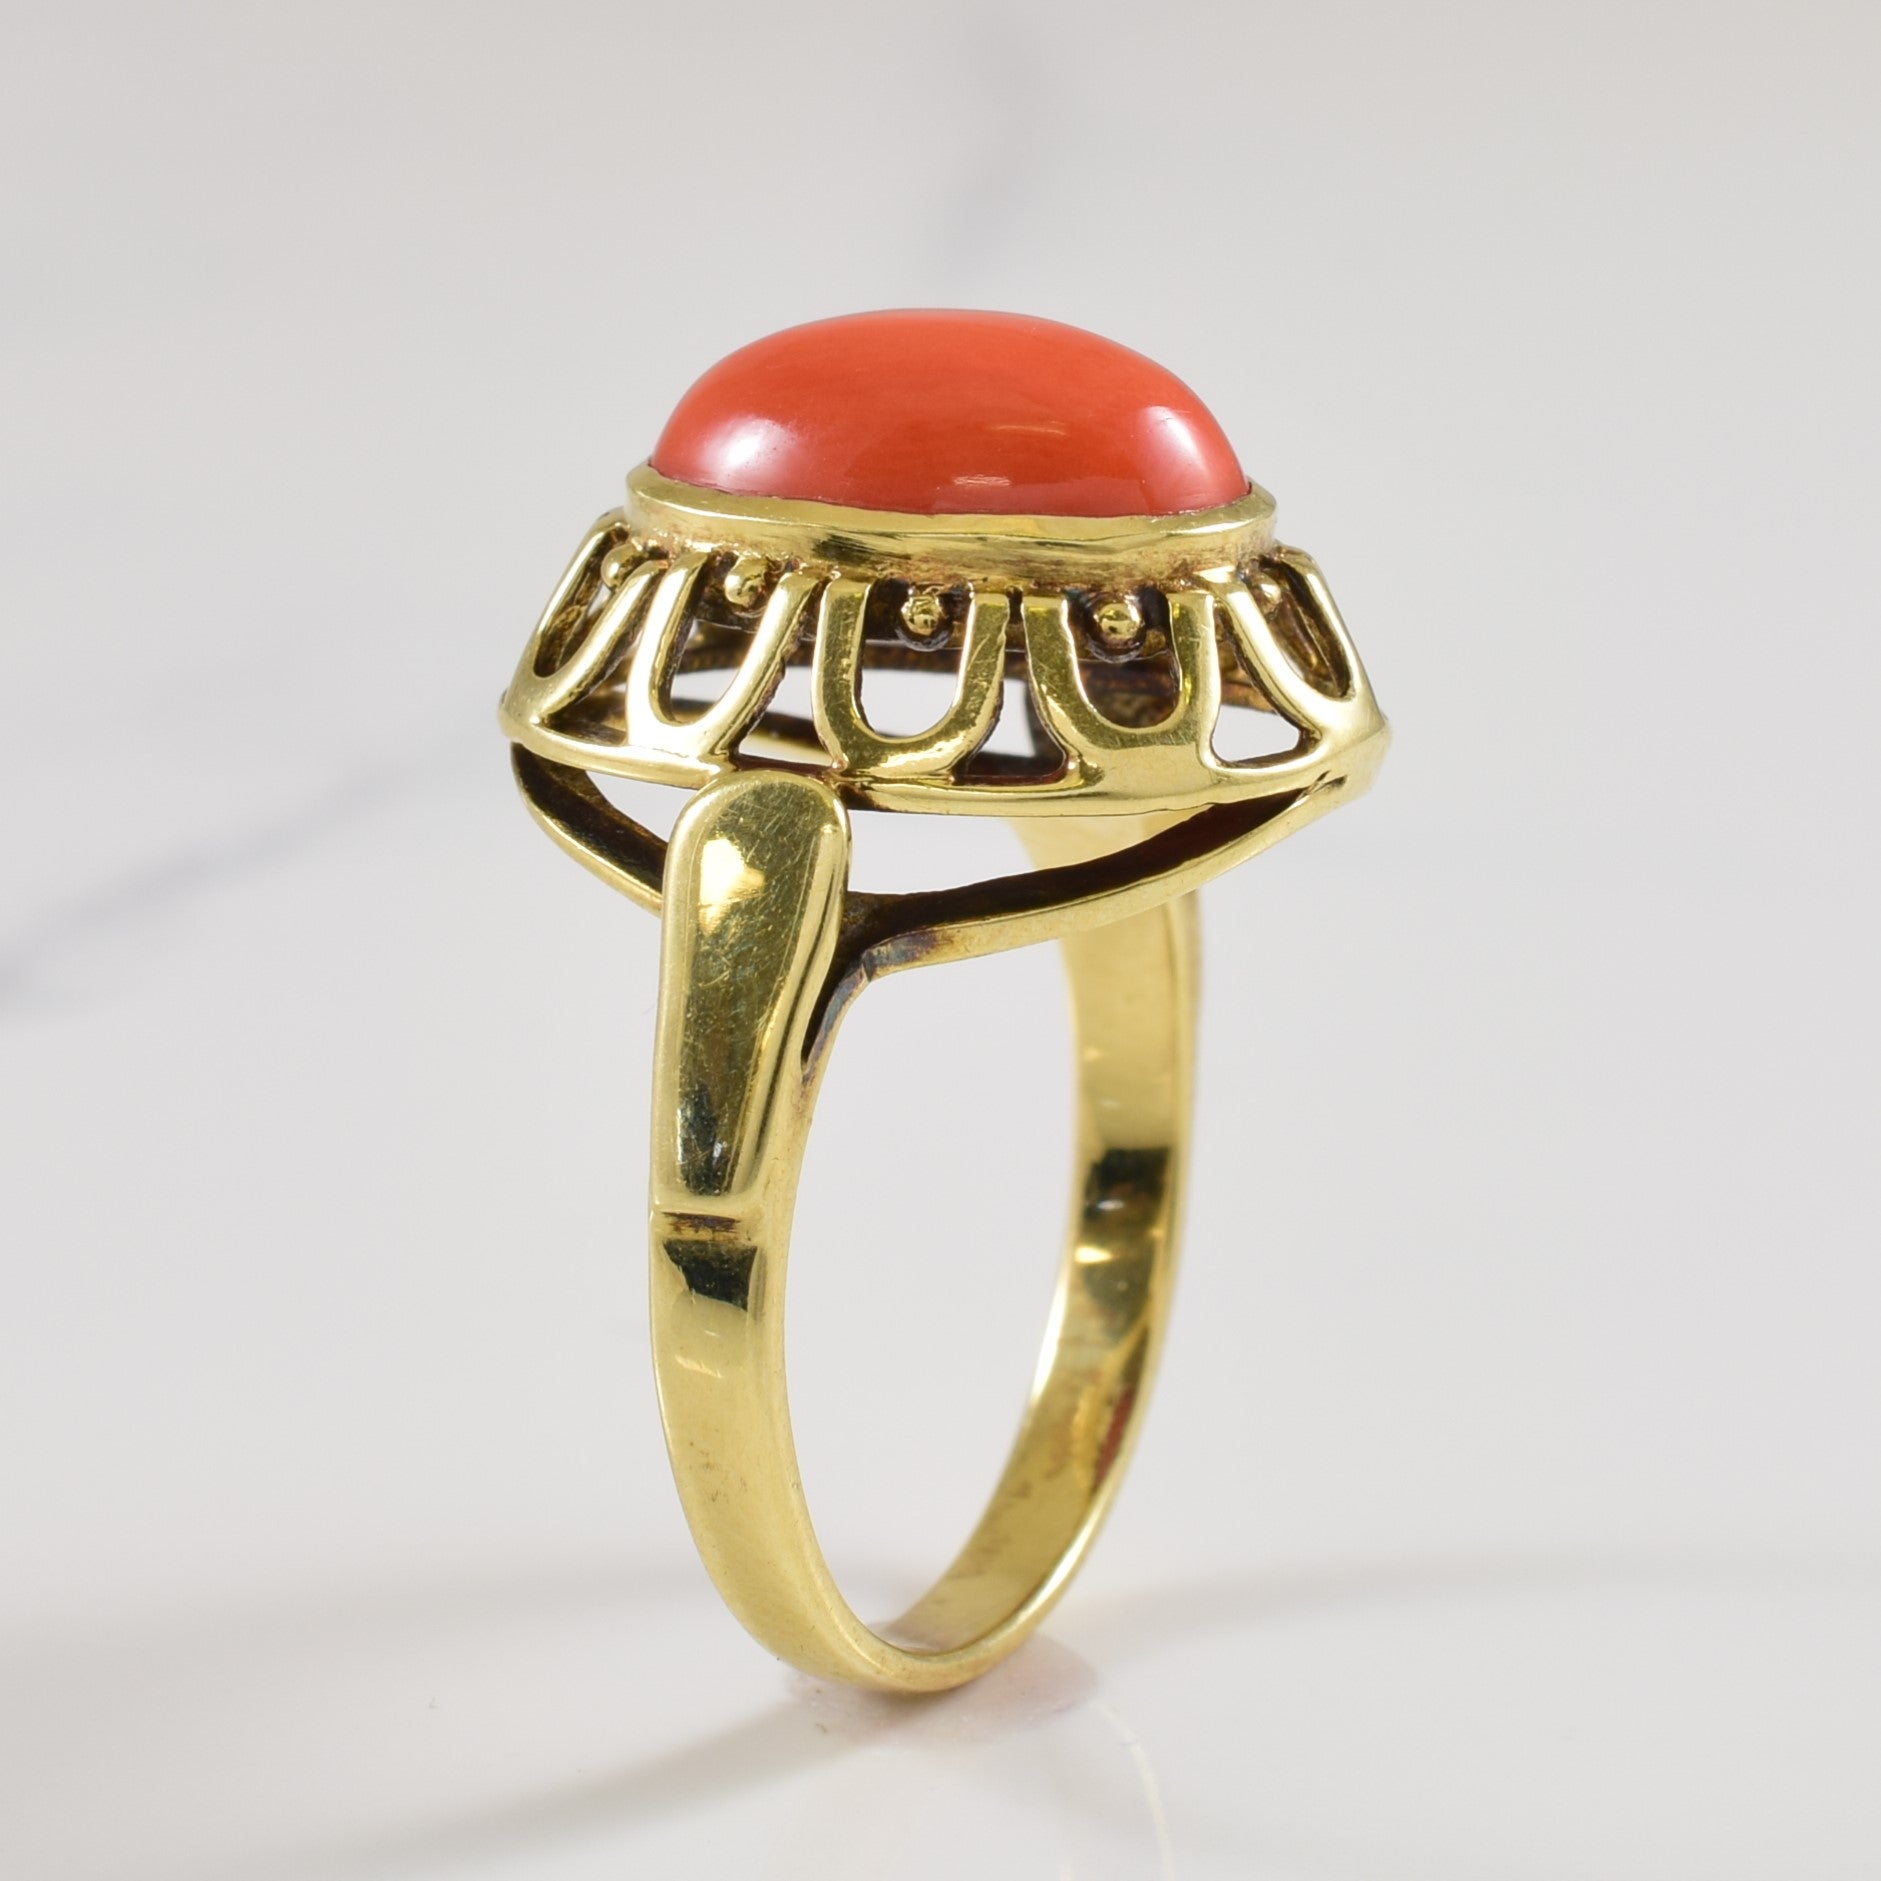 Coral Cocktail Ring | 3.00ct | SZ 6.5 |